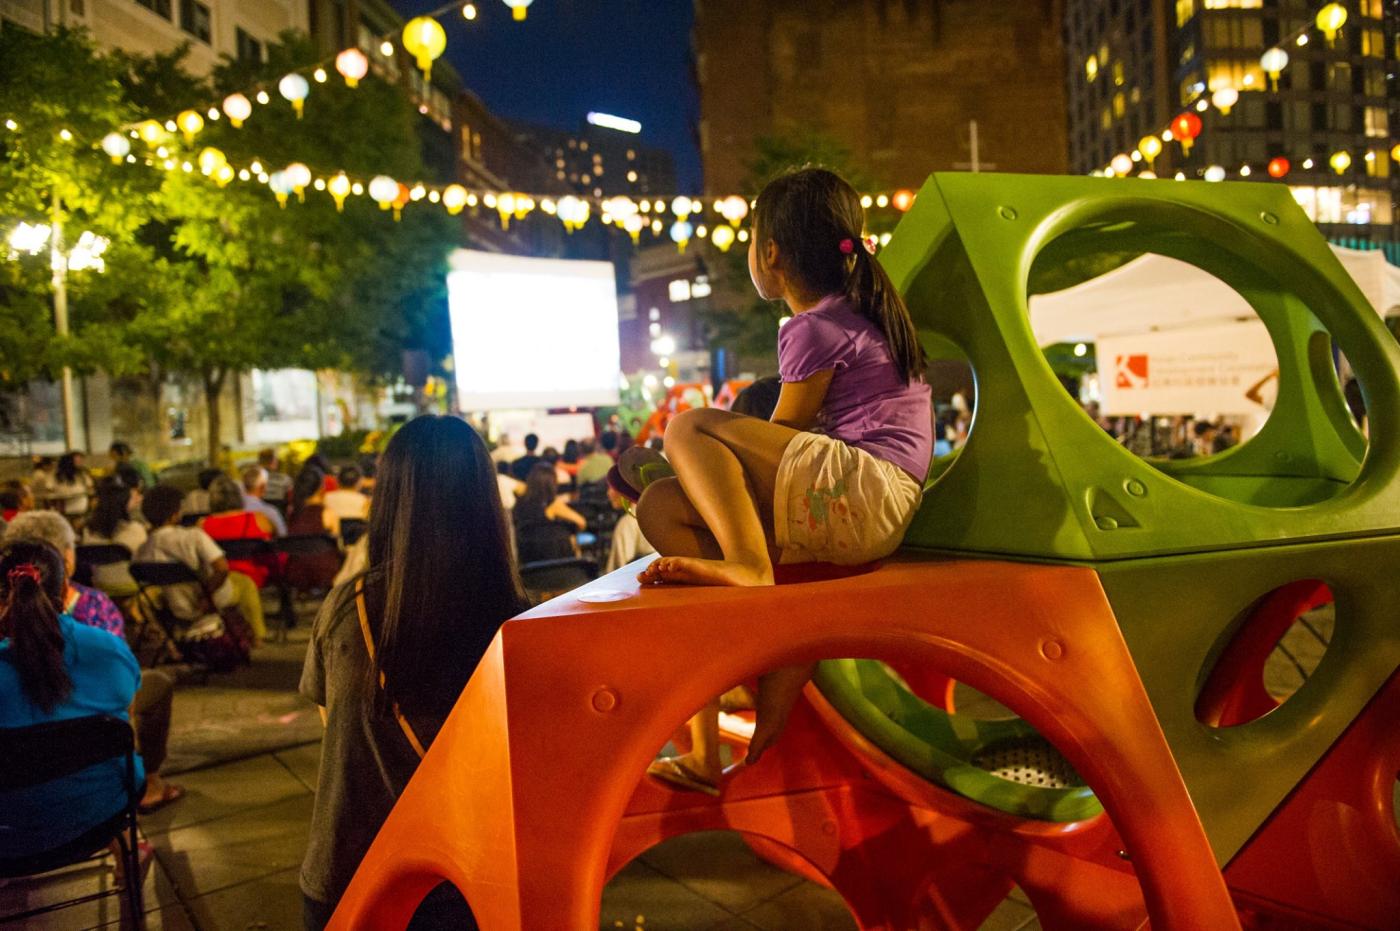 At night, a young Asian girl looks at a projection, while sitting on a jungle gym.